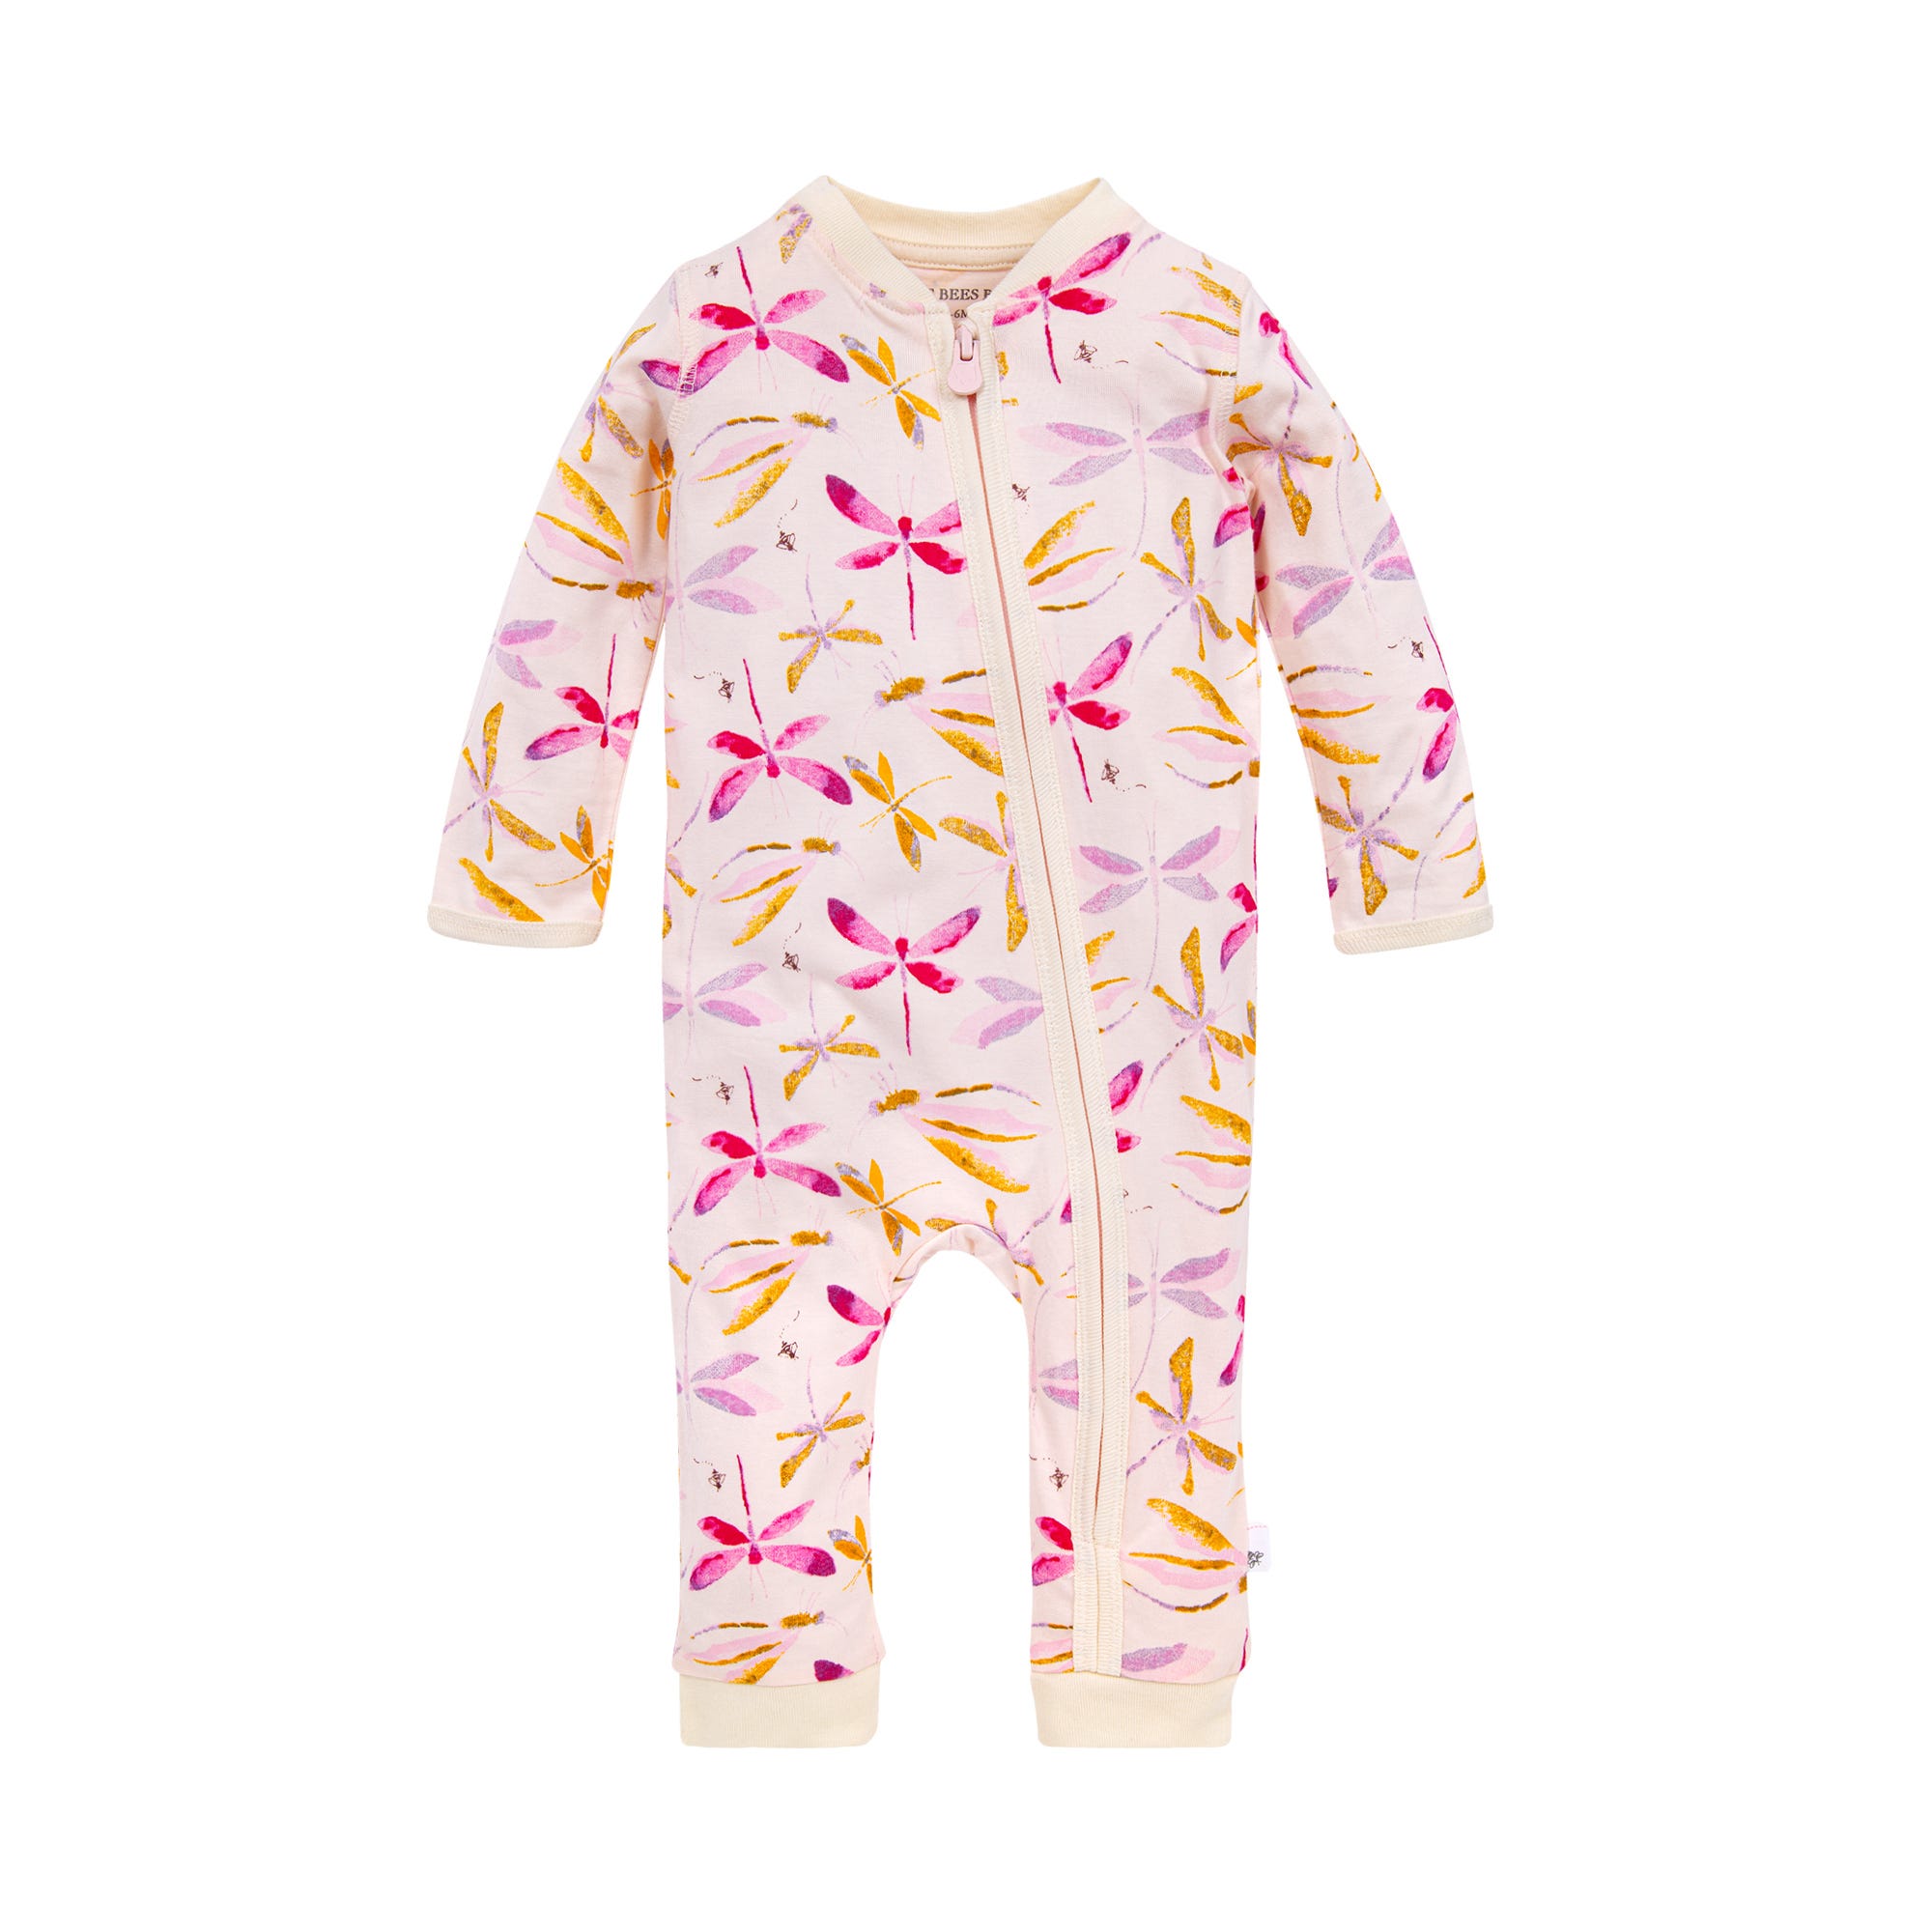 discount 75% Multicolored S WOMEN FASHION Baby Jumpsuits & Dungarees Print Zara jumpsuit 